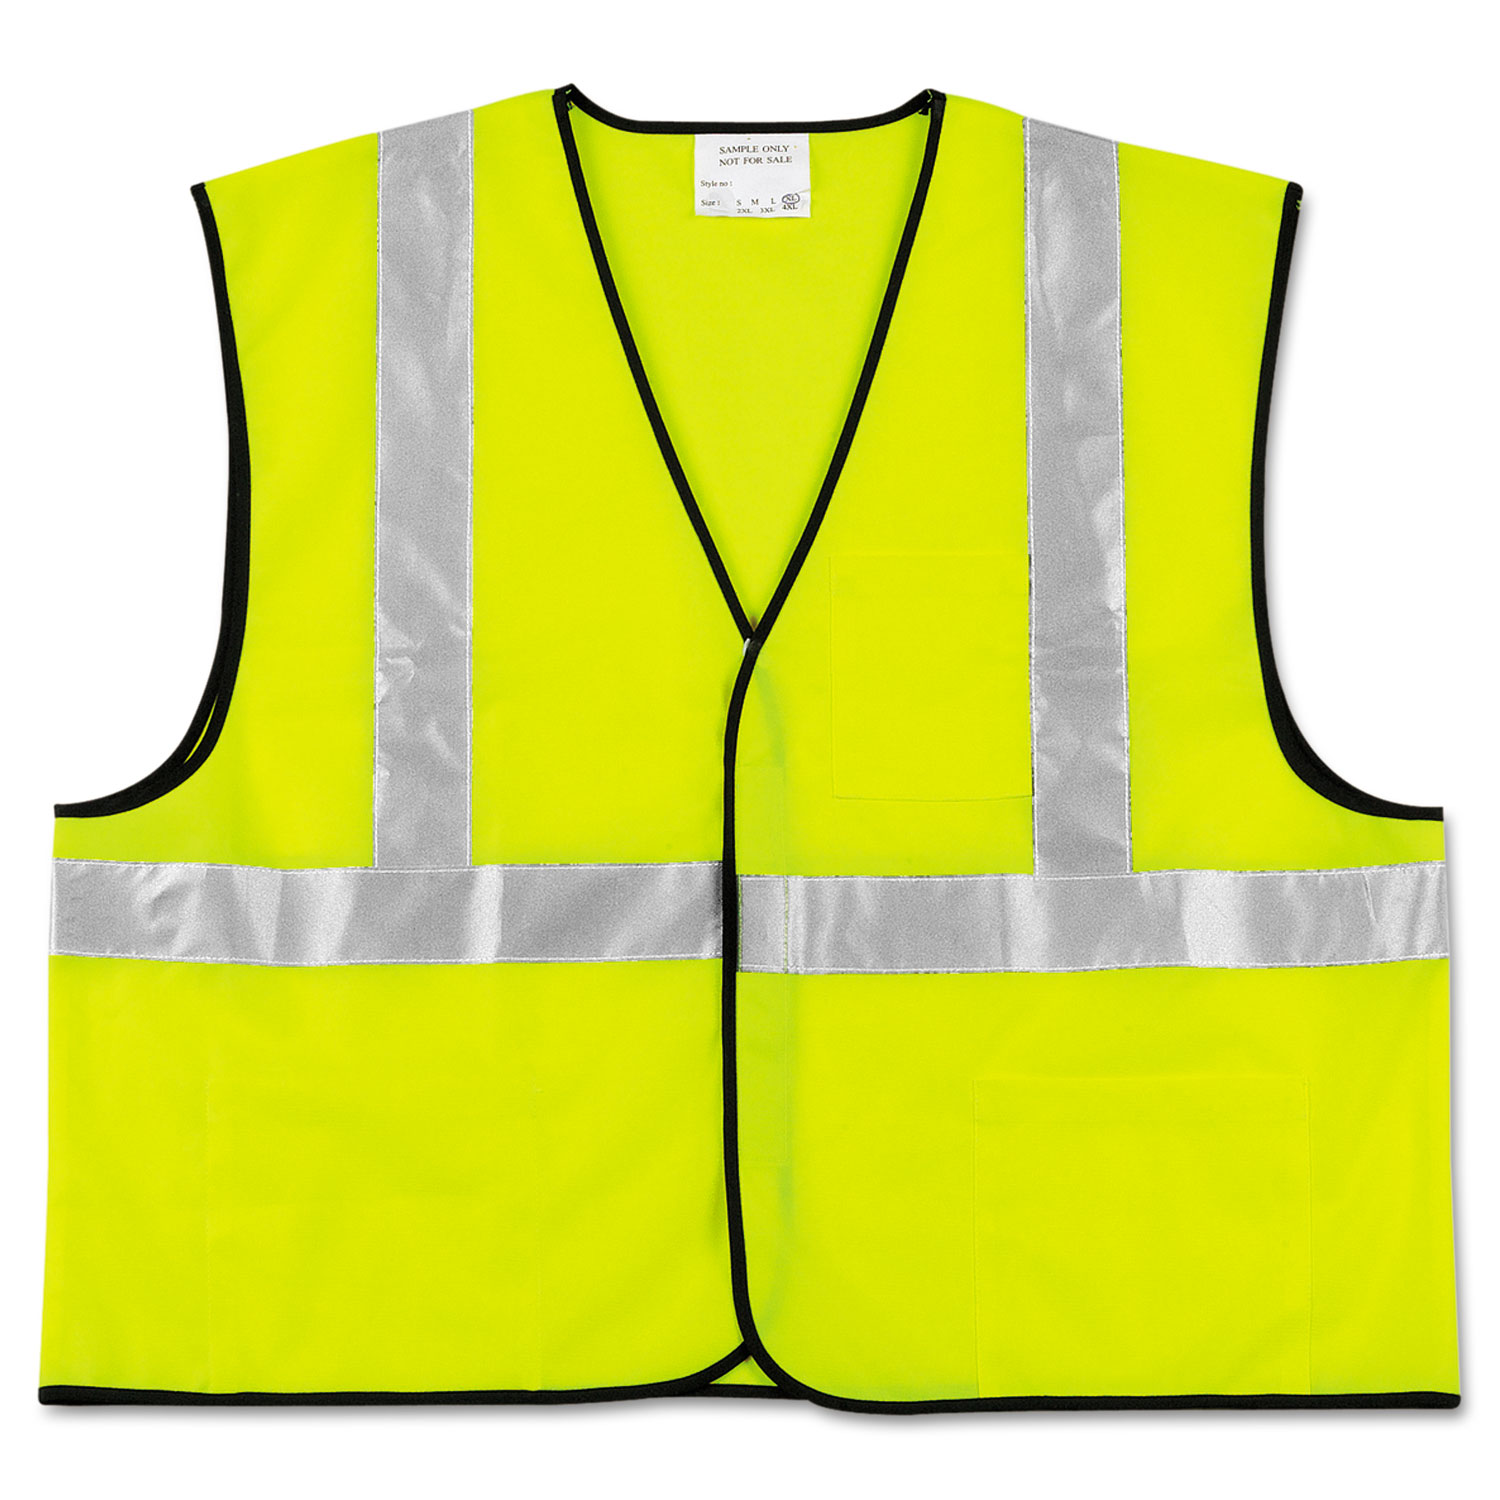  MCR Safety VCL2SLL Class 2 Safety Vest, Fluorescent Lime w/Silver Stripe, Polyester, Large (CRWVCL2SLL) 